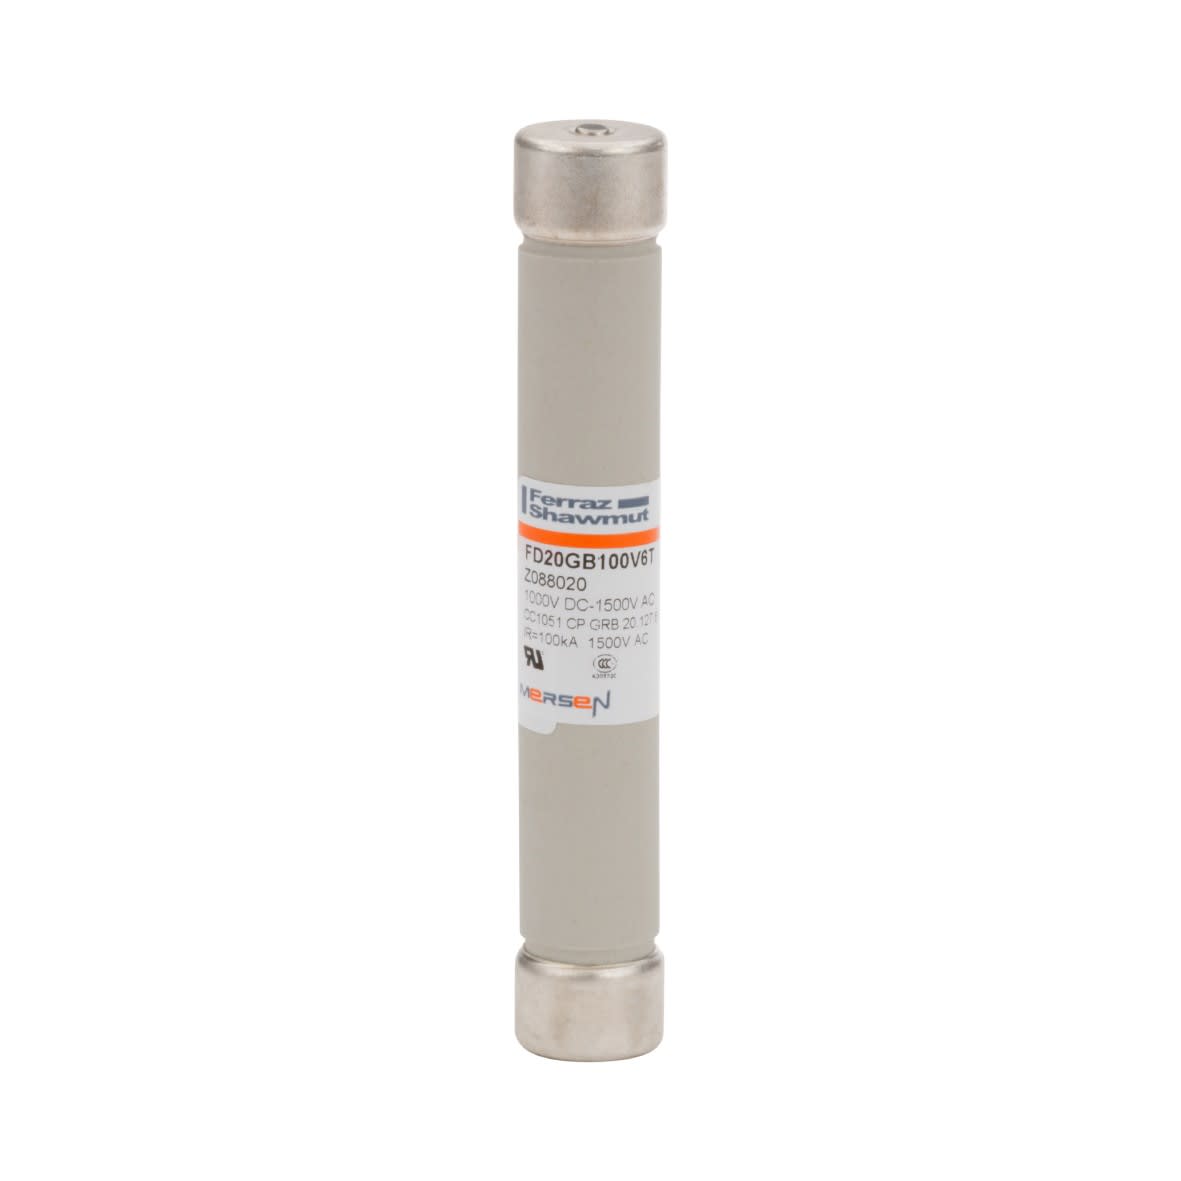 Mersen - Fusible Cylindrique ultra rapide 20x127 gR (gRD) 1500VDC 8A